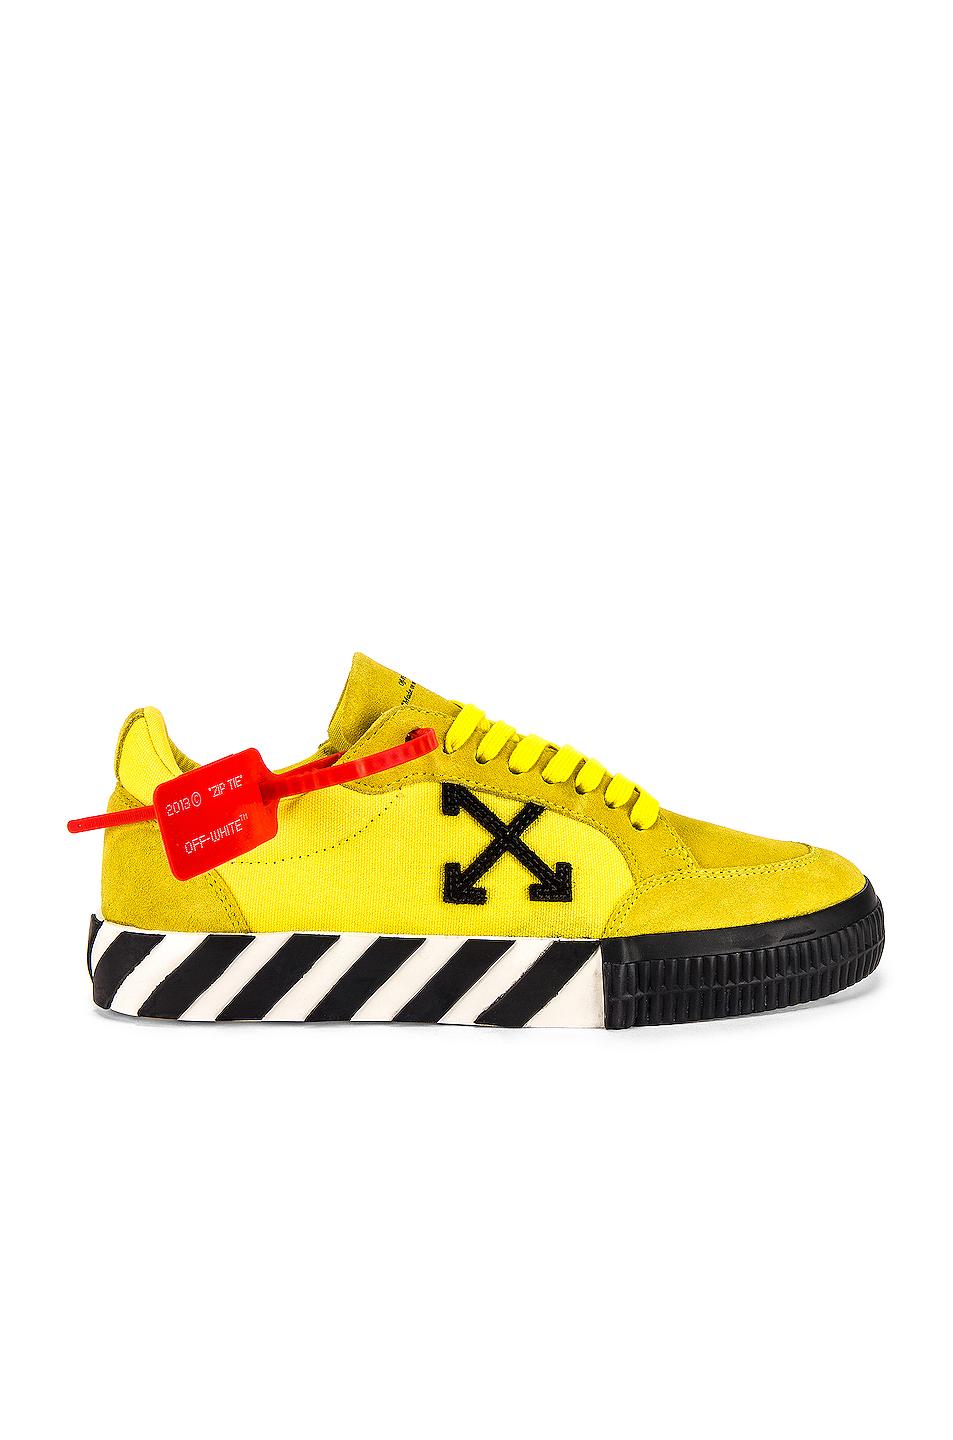 Off-White c/o Virgil Abloh Suede Low Vulcanized Sneaker in Yellow ...